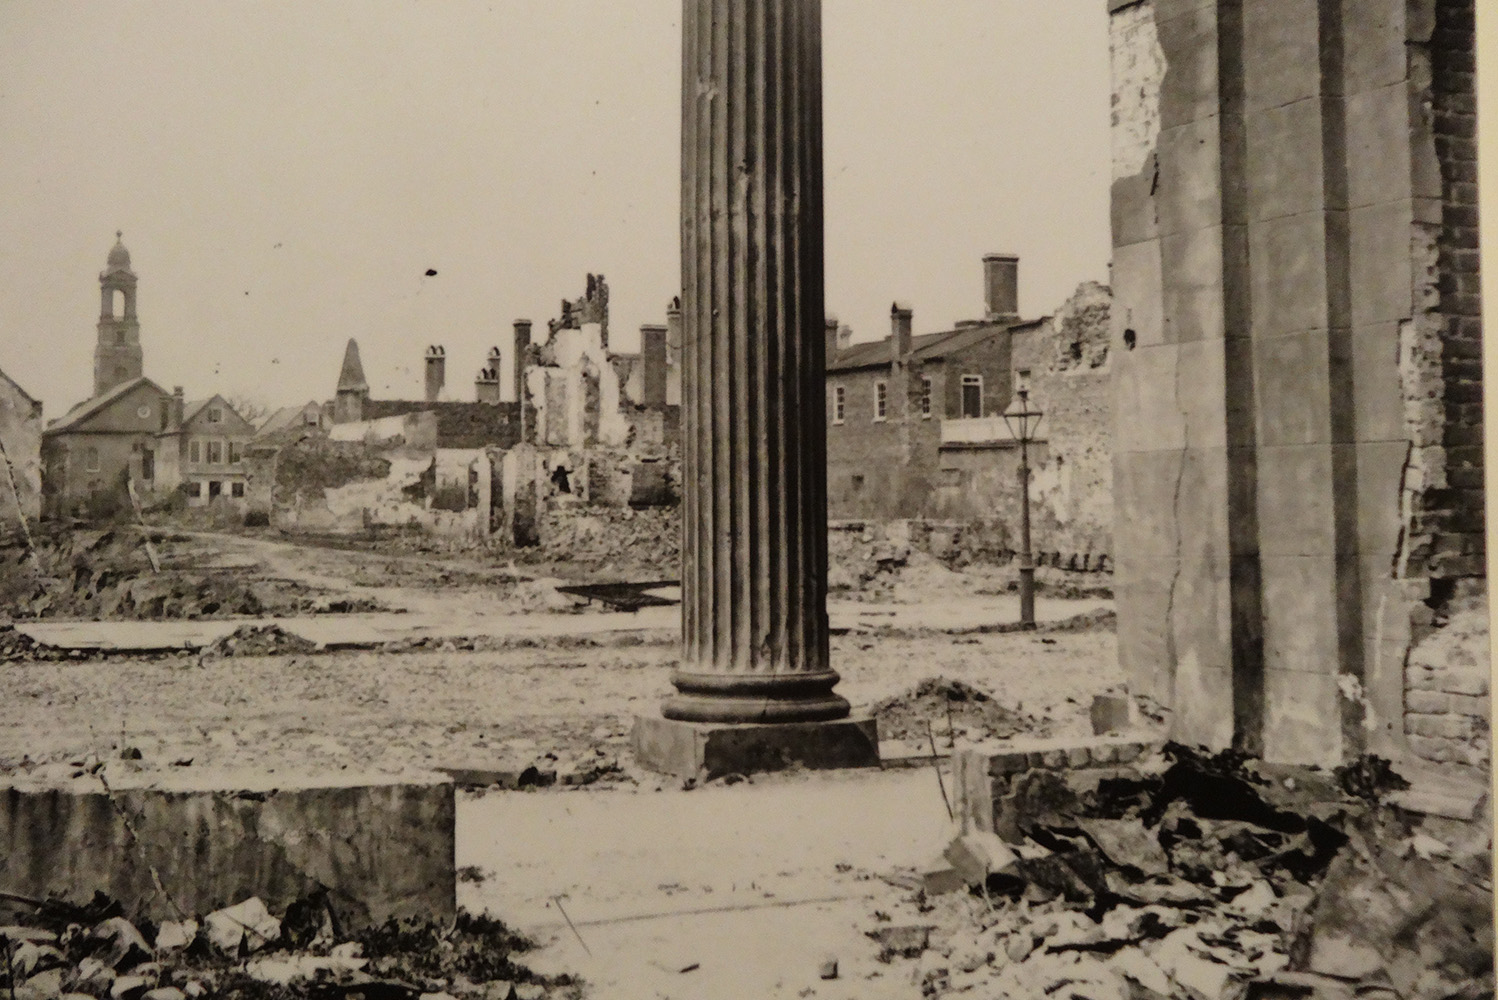 Charlestown SC in ruins during the Civil War